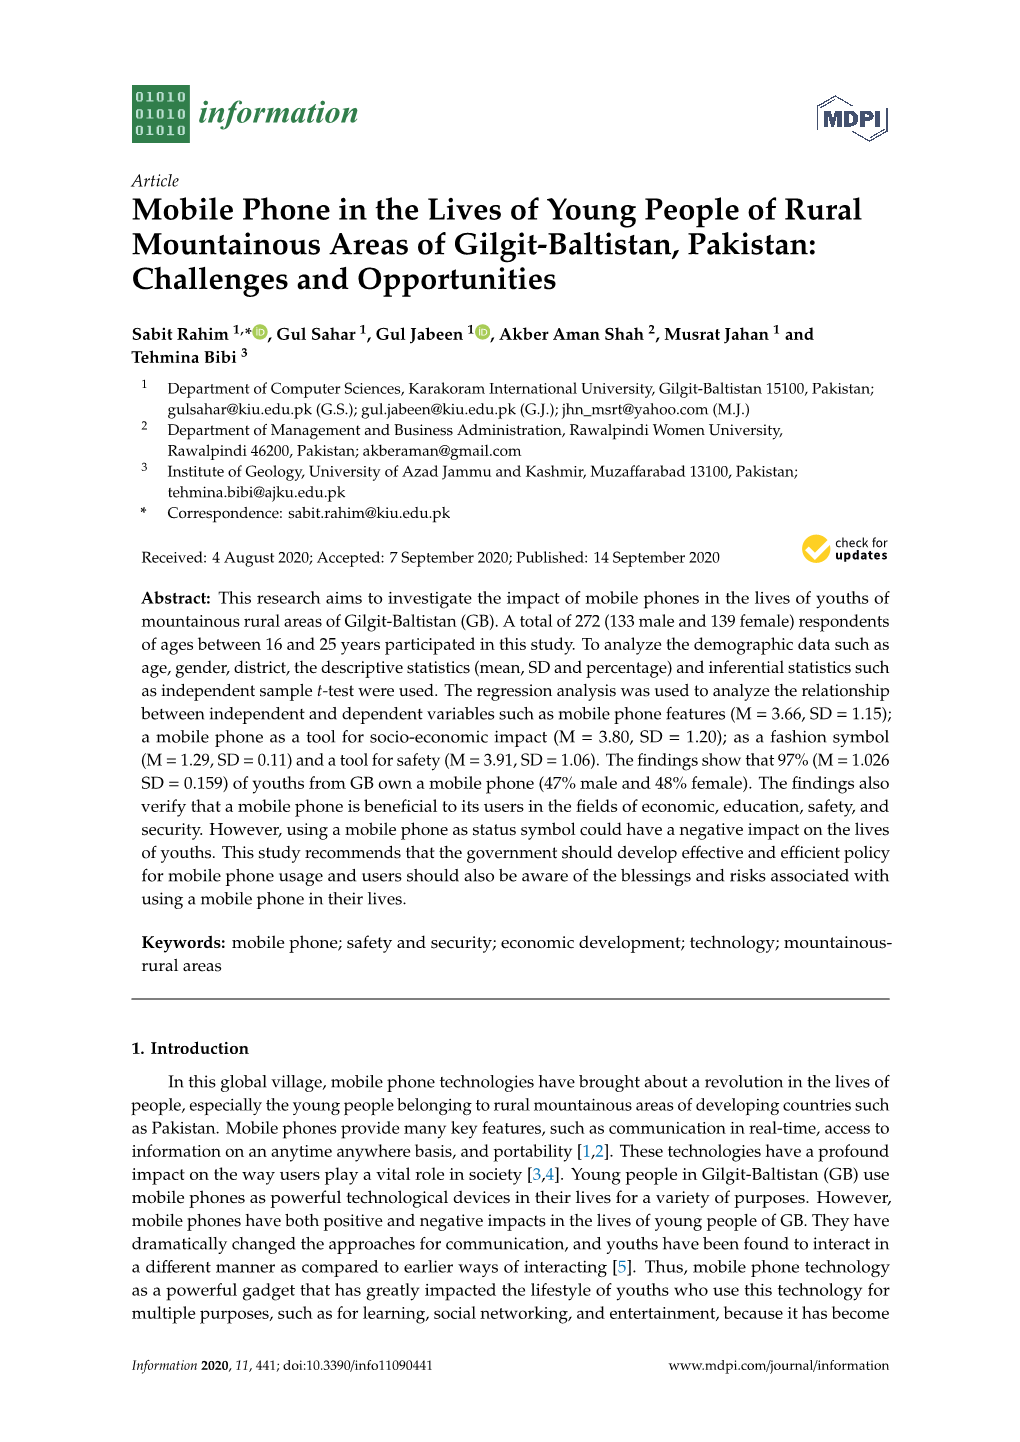 Mobile Phone in the Lives of Young People of Rural Mountainous Areas of Gilgit-Baltistan, Pakistan: Challenges and Opportunities